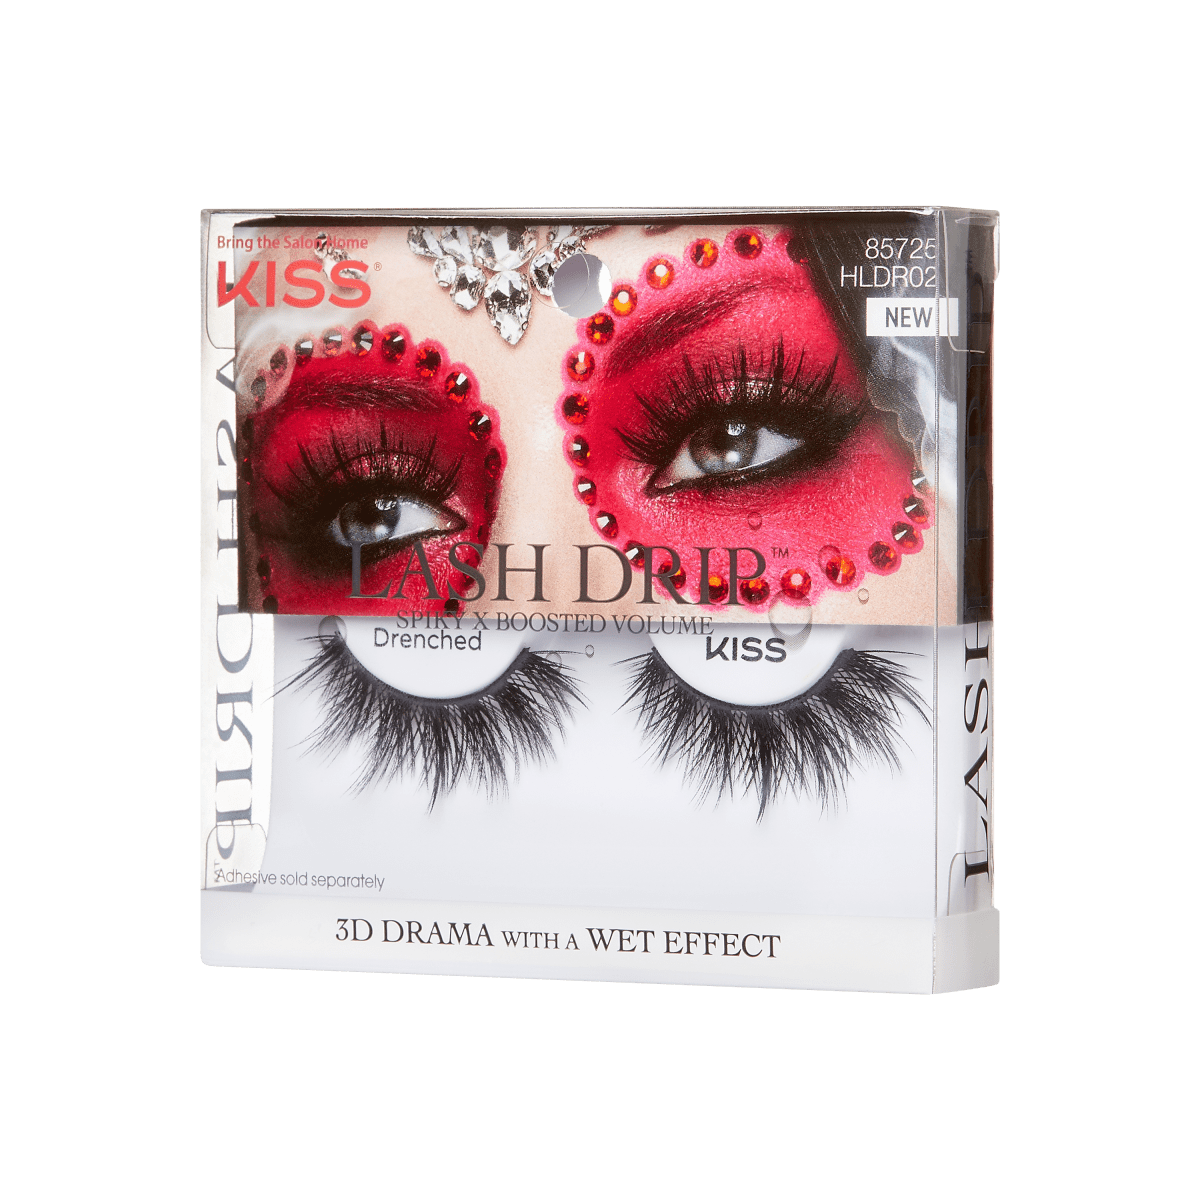 Halloween Lash Drip - Drenched